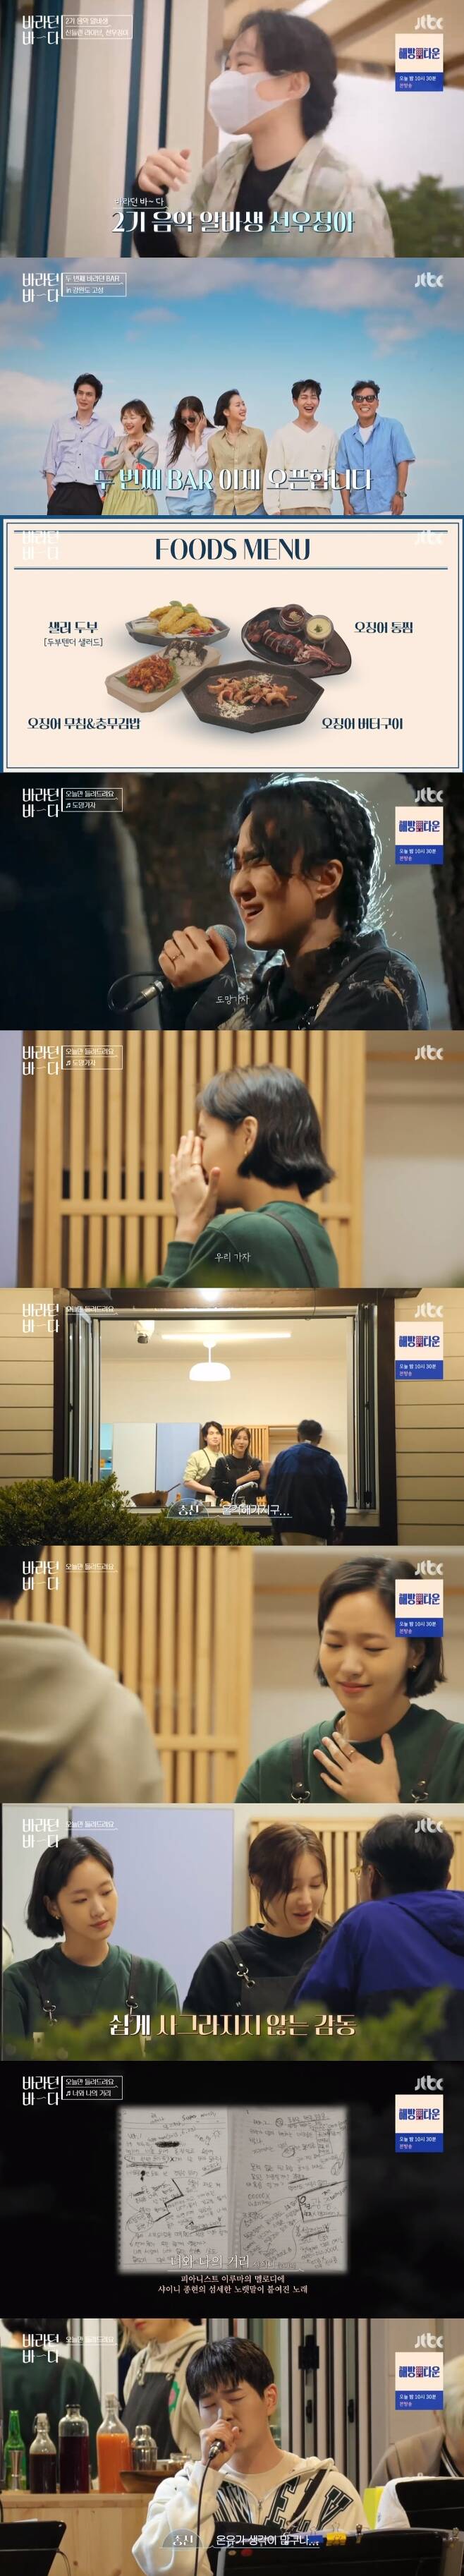 Seoul = = The Sea I Wanted Lee Ji-ah Confessions the inside mind.On the afternoon of the 10th, JTBC entertainment program Wishing Sea, members such as Yoon Jong Shin, Lee Ji-ah, Lee Dong-wook, Kim Go-eun, SHINee OOnew, and Akmu Suhyun visited the second sea Gangwon province.Seonwoo Jeonga was the second music student to go to workLove Live!! The stage was all ringing.Lee Ji-ah in the tearful sea made a cool confessions and attracted attention.The Onew bar was unveiled on the day, with the layout of interior and practical kitchen appliances filled with eco-friendly furniture robbing the eye.Yoon Jong Shin admired it as modern, and Lee Dong-wook was also pleased to say pretty.Kim Go-eun helped to feel the same way that he had complemented the inconvenience last time.Seonwoo Jin arrived; Yoon Jong Shin welcomed him, saying, There is no Onew to follow Seonwoo Jeonga these days, the stage suction is great.Yoon Jong Shin introduced the members in turn; Seonwoo Jeonga said: I cant eat, Ill only play an assistant role.I wish I had a talent, but please look at it and serve it. Frankly, I laughed.I am looking forward to it, and Love Live! Thank you for it. The guests came to visit. Lee Ji-ah was attracted to the menu with various menus including steamed squid, steamed squid, and Chungmu Kimbap, and grilled squid butter.It was also said that it was crazy visual enough to be posted on social media. Lee Ji-ah was proud of the hot response.From OOnewLove Live!! stage was presented. After a solo song, the song was touched by Yoon Jong Shin, who suddenly set up a second stage.Call me good at the request of the guests. Yoon Jong Shins enthusiasm gave me a great impression.Finally, Seonwoo Jeonga took the stage; Kim Go-eun expressed his excitement, saying, Im a steaming fan, Im a Sungdeok Sungdeok.Seonwoo Jeonga has chosen from The Runaway; Kim Go-eun raved as soon as he heard the first verse, saying, How.He was a little closer to the stage, and he felt a lot of emotions, and the guests were blushing Onew by Onew.Lee Ji-ah, Lee Dong-wook, on the stage of impression, was surprised to say, How do you call it that?, I can not even shake, Im just creepy.OOnew turned to say that he was going to cry before the start of the song, and for a while, OOnew picked up You and My Street and set up a duet with Seonwoo Jeonga.You and My Street is a song by SHINee with a song written by the late Jonghyun on the melody of pianist Iruma. The harmony of the two added to the impression.It was a really happy moment, said OOnew, who sang with Seonwoo Jeonga with all his might.Kim Go-eun heard the voice of Seonwoo Jeonga and said, Crying is a real initiative, it keeps getting sore. Its a big deal.This is also Jonghyuns lyrics, I think OOnew has a lot of thoughts, said Yoon Jong Shin, who again rallied, saying, What the hell, its a ploy, wait a minute.Kim Go-eun then asked Yoon Jong Shin, Do you have more tears when you are in your 50s? Yoon Jong Shin said that he thought it was all like that when you get older.At this point Lee Ji-ah opened up that he was not.I am the opposite, rather gOnew, he said. I have been through a lot of (hard work) and nothing makes me sad.Kim Go-eun said that he has more tears these days to face his own problems. Do not you see Father tearing?I was crying suddenly because Father was too short and was being loved by him. Yoon Jong Shin said, Tears in my 50s are a little bit of enlightenment.I am sorry that I realized now. Kim Go-eun recalled the feeling that he had been crying more when he heard that.On the other hand, The Sea of ​​Wish is a program featuring the songs selected directly from Love Live! Bar where the sea is visible, the stars who show their own dishes, and the guests who visited the place.